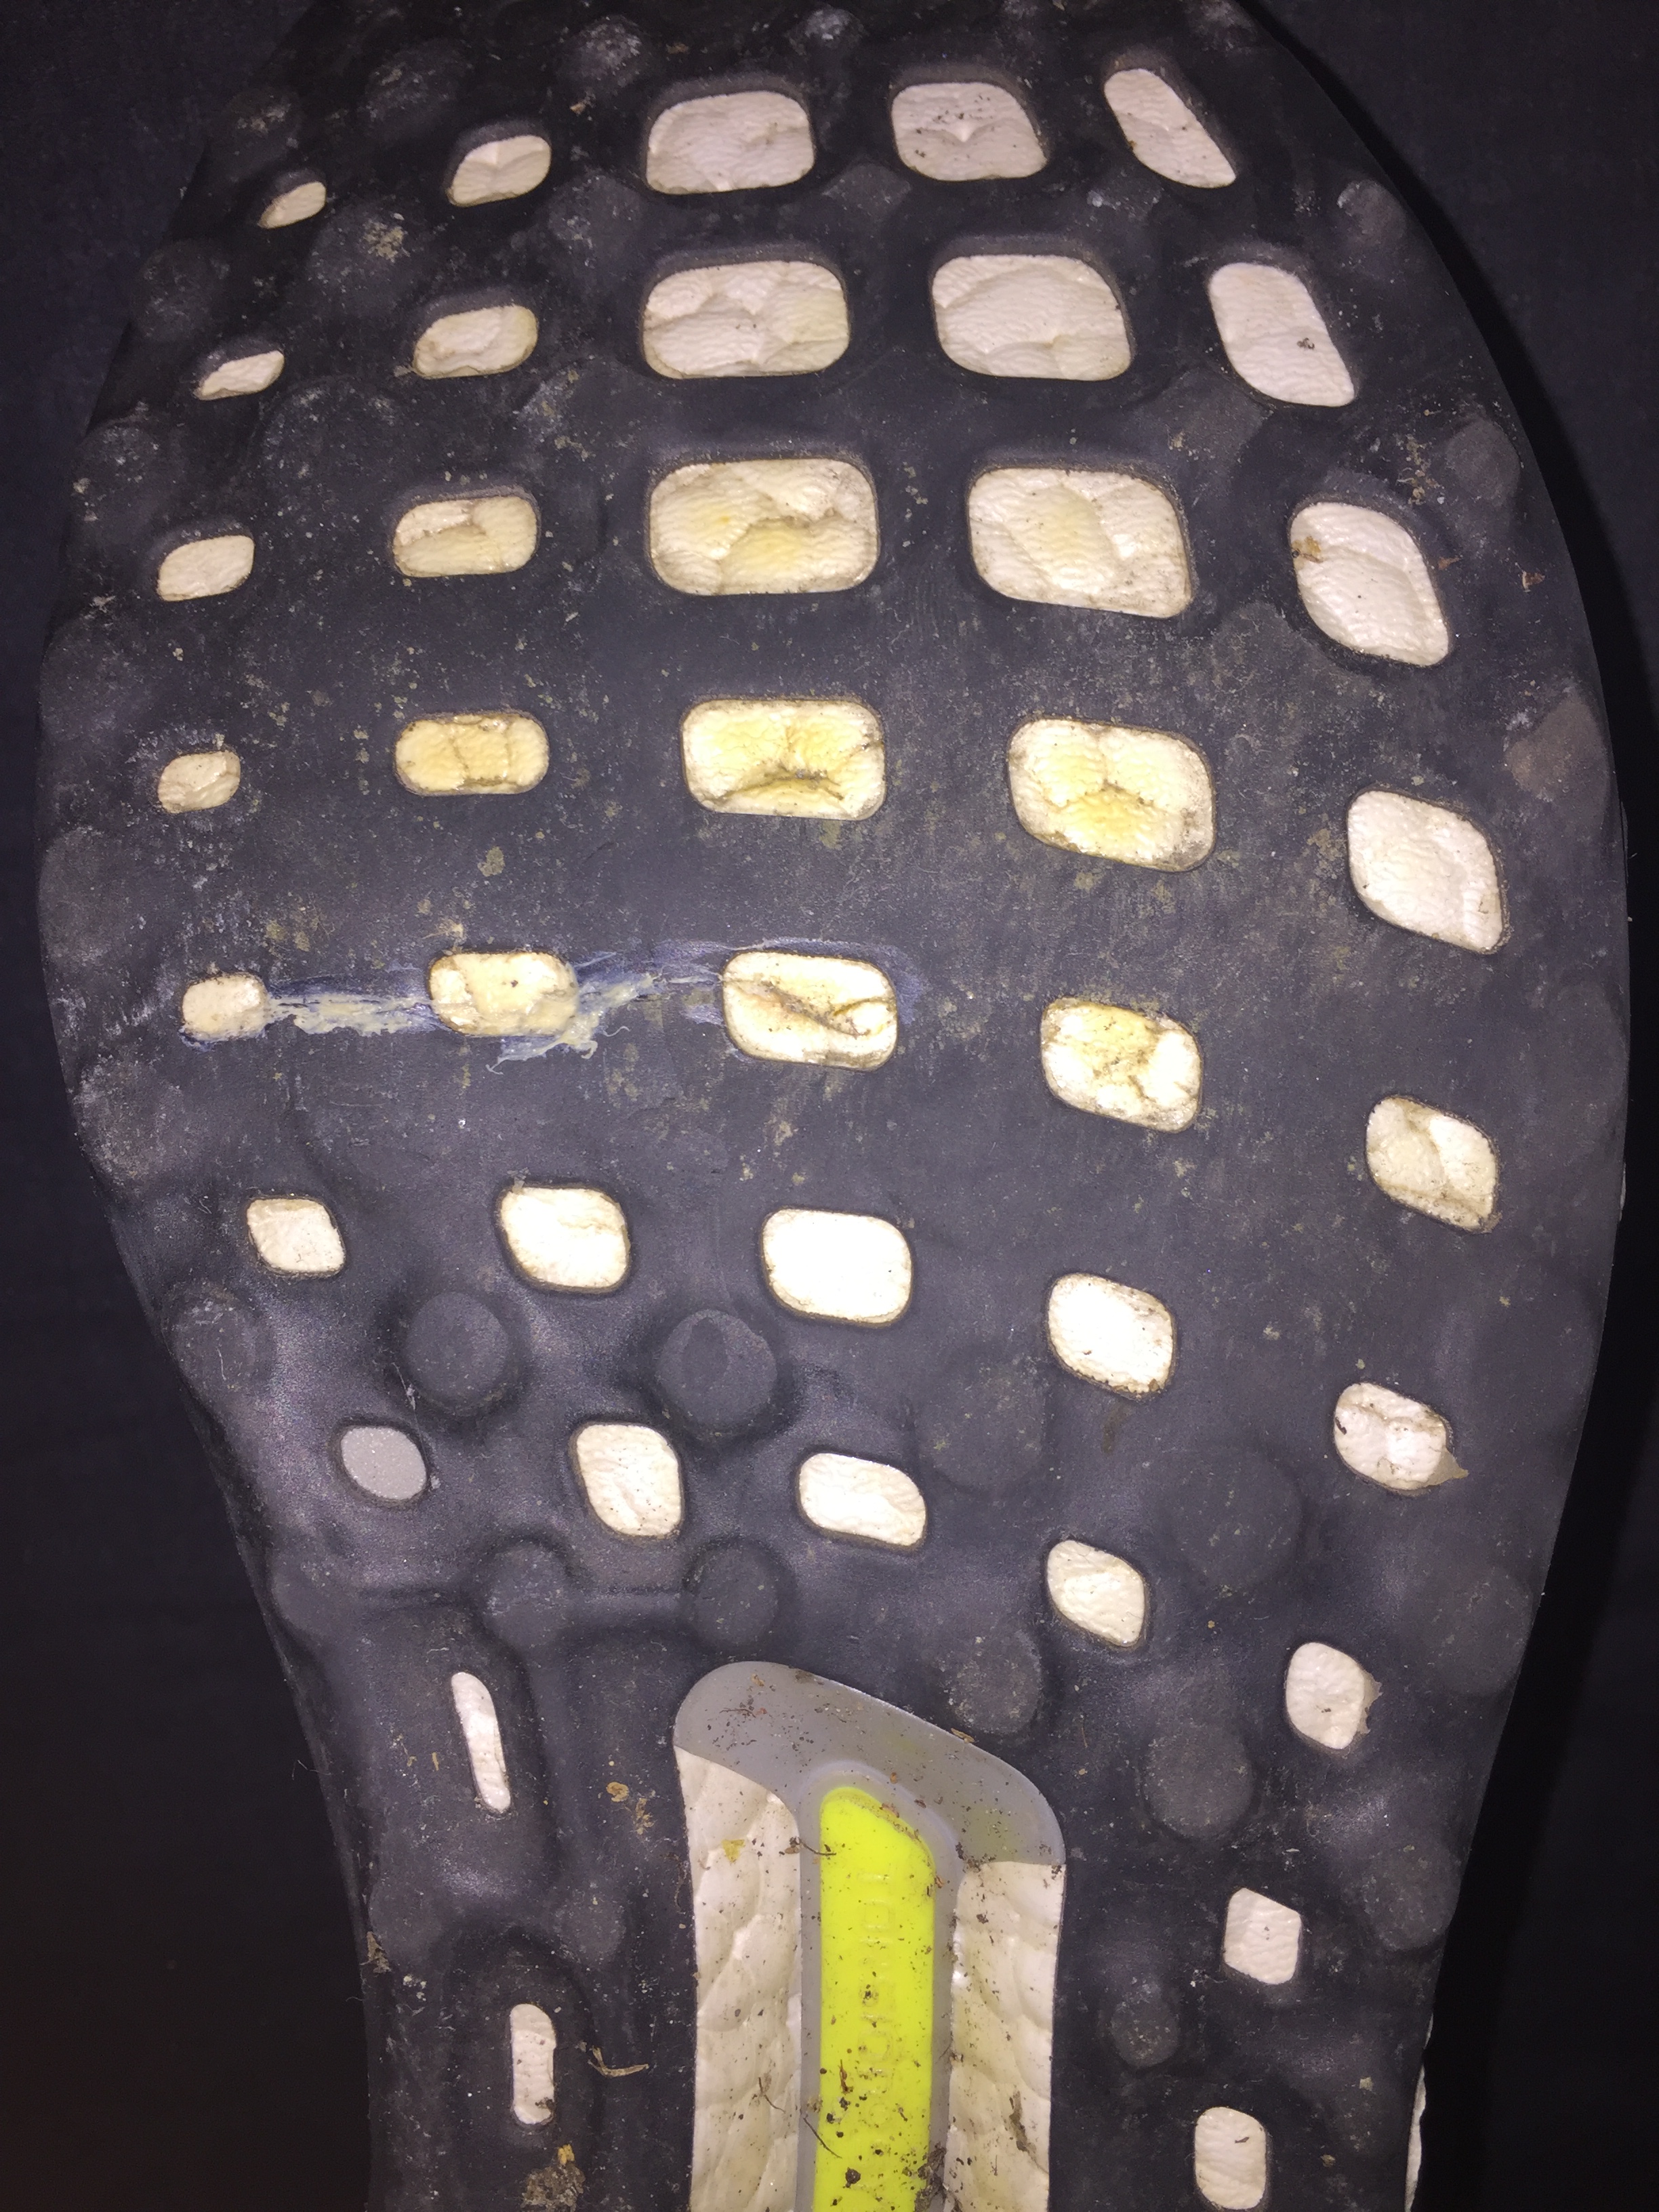 ultra boost sole wearing out